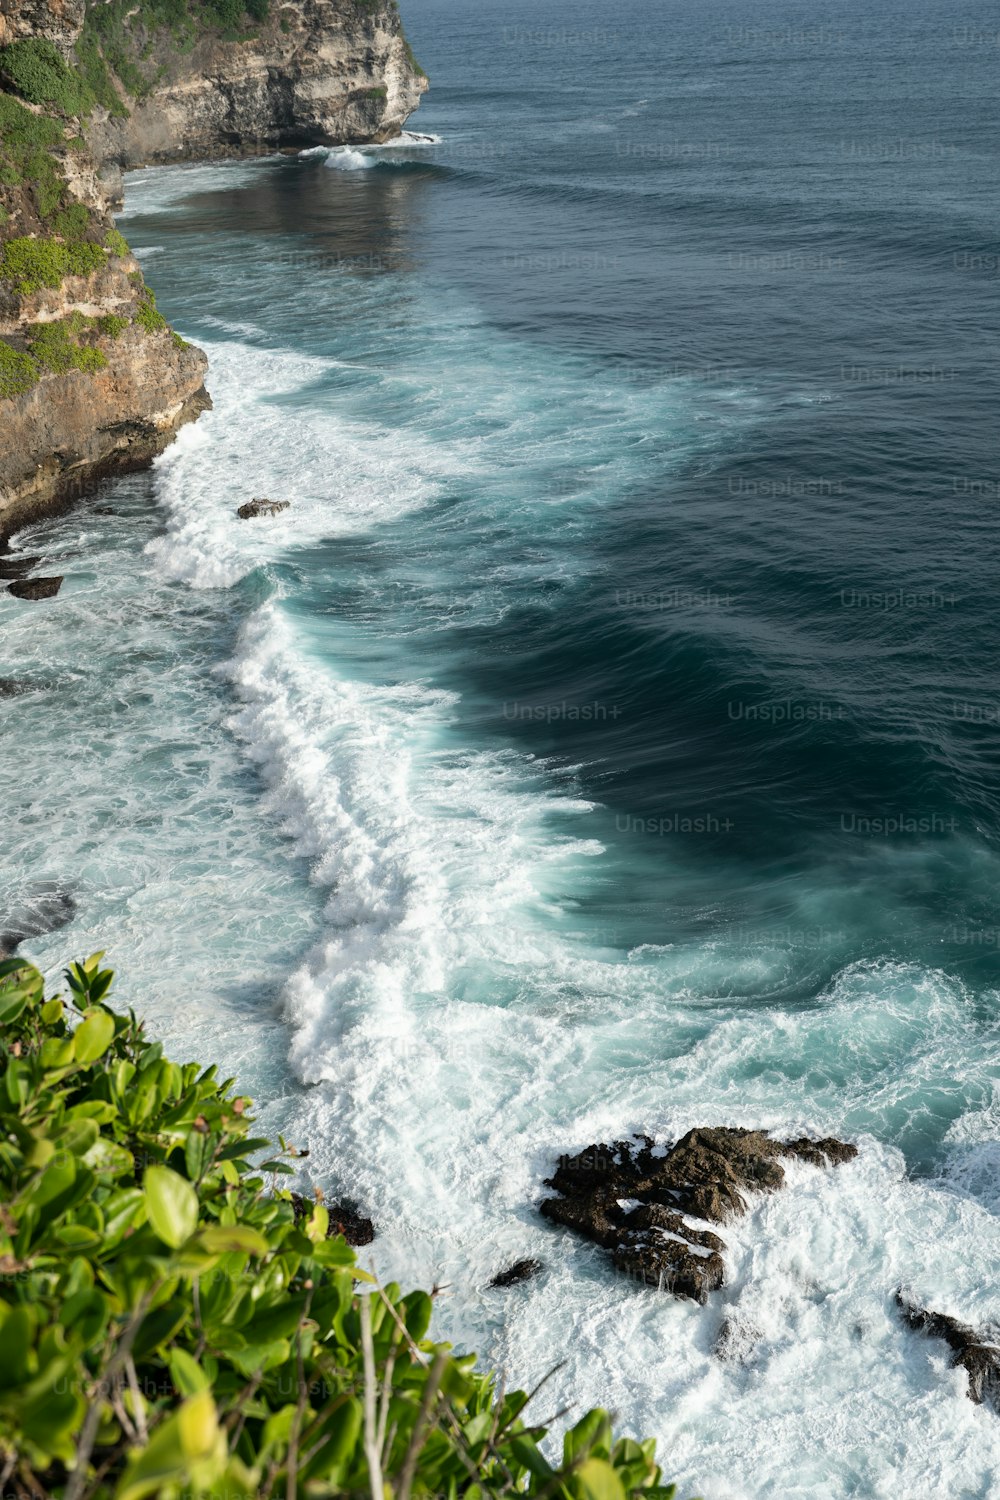 a view of the ocean from a cliff